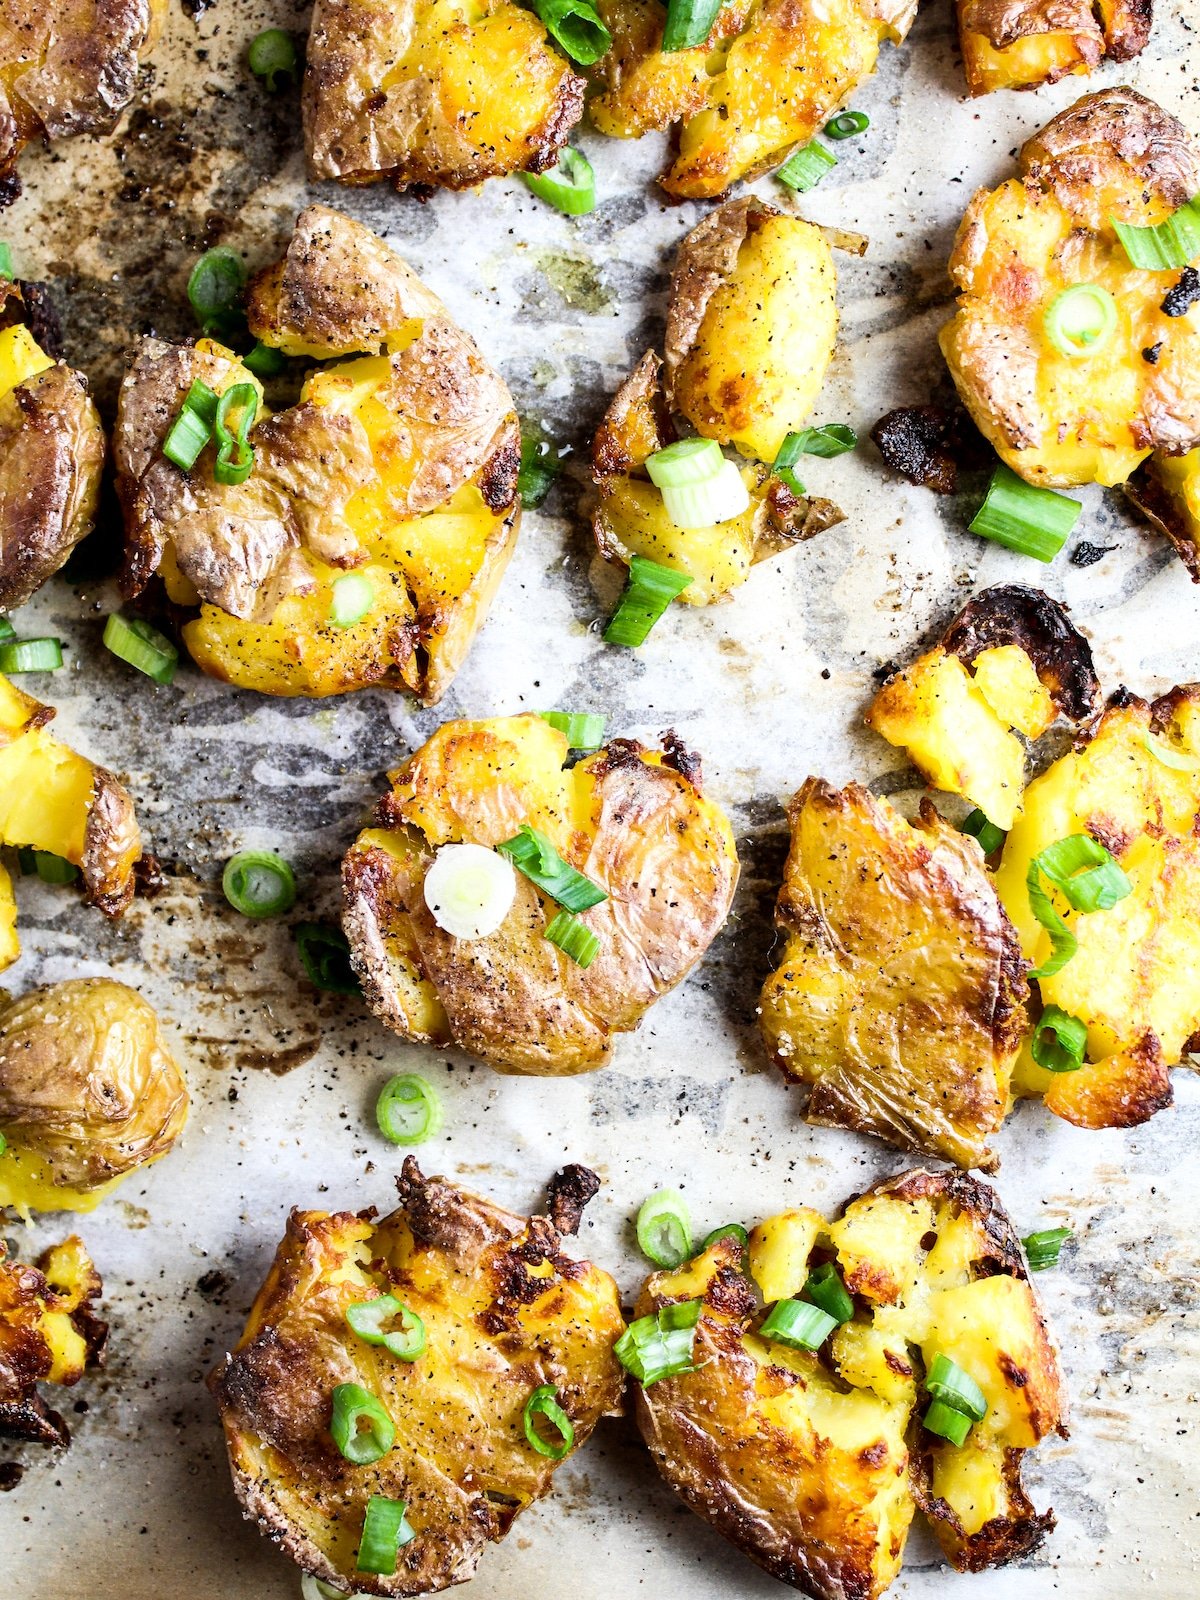 Crispy potatoes on a baking sheet with green onions.